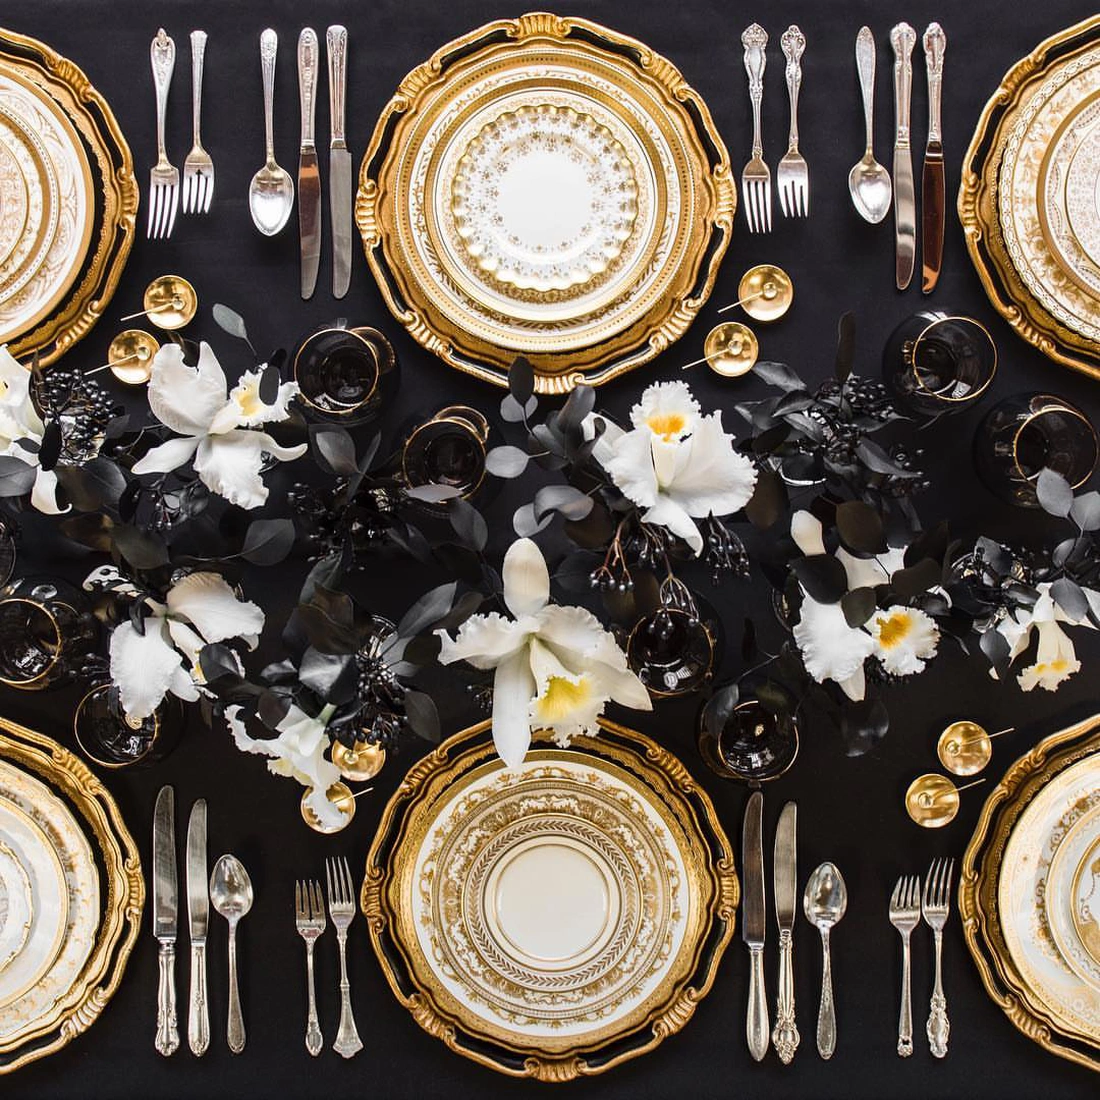 Florentine Chargers in Black/Gold + Crown Gold Collection Vintage China + Antique Silver Flatware + Bella 24k Gold Rimmed Stemless Glassware in Smoke